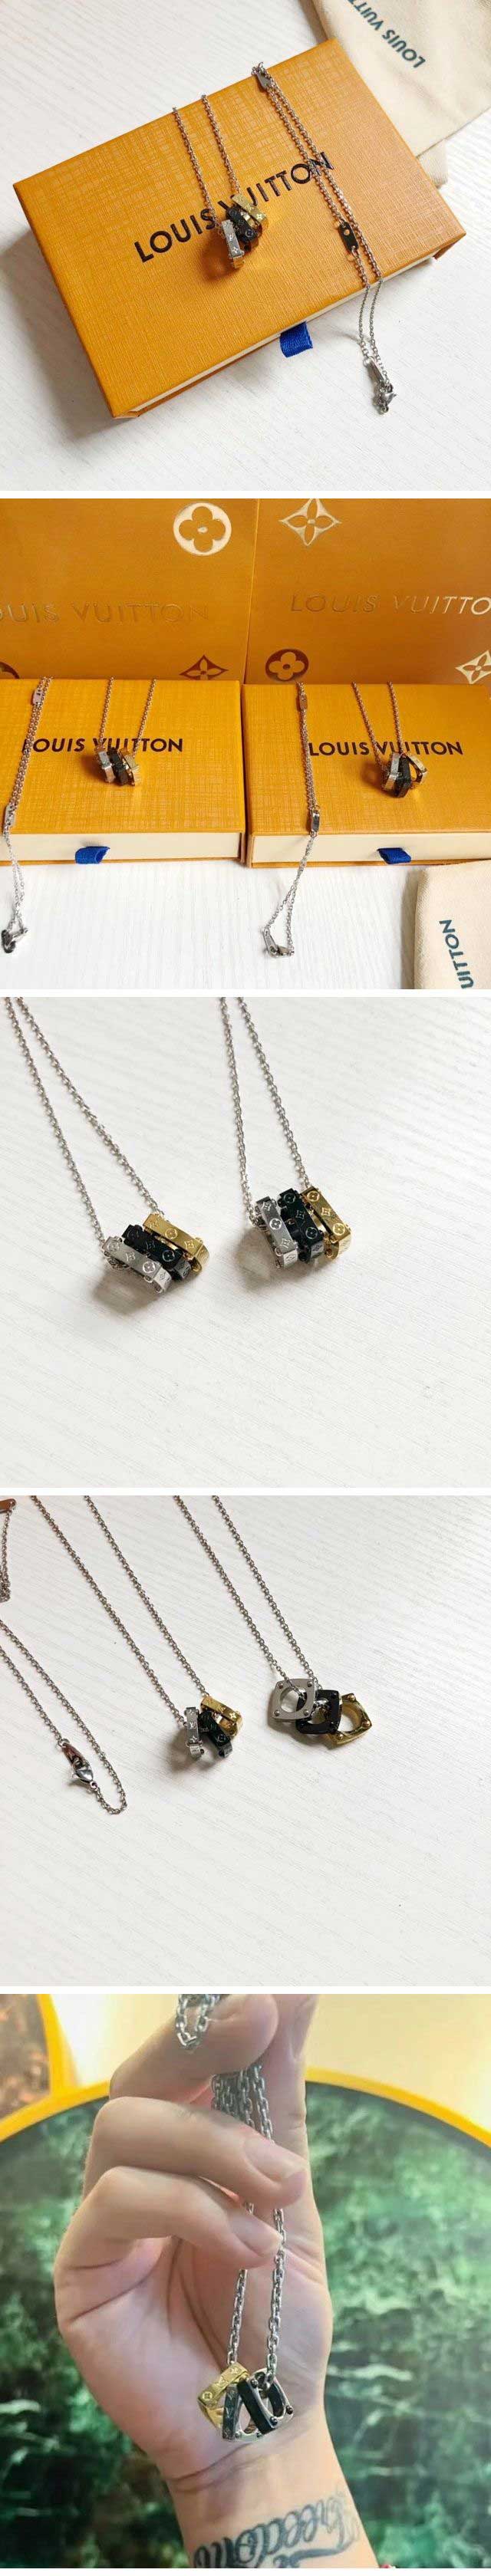 Louis Vuitton Monogram Bold Dlock Design Necklace ルイヴィトン モノグラム ボールド ブロック デザイン ネックレス